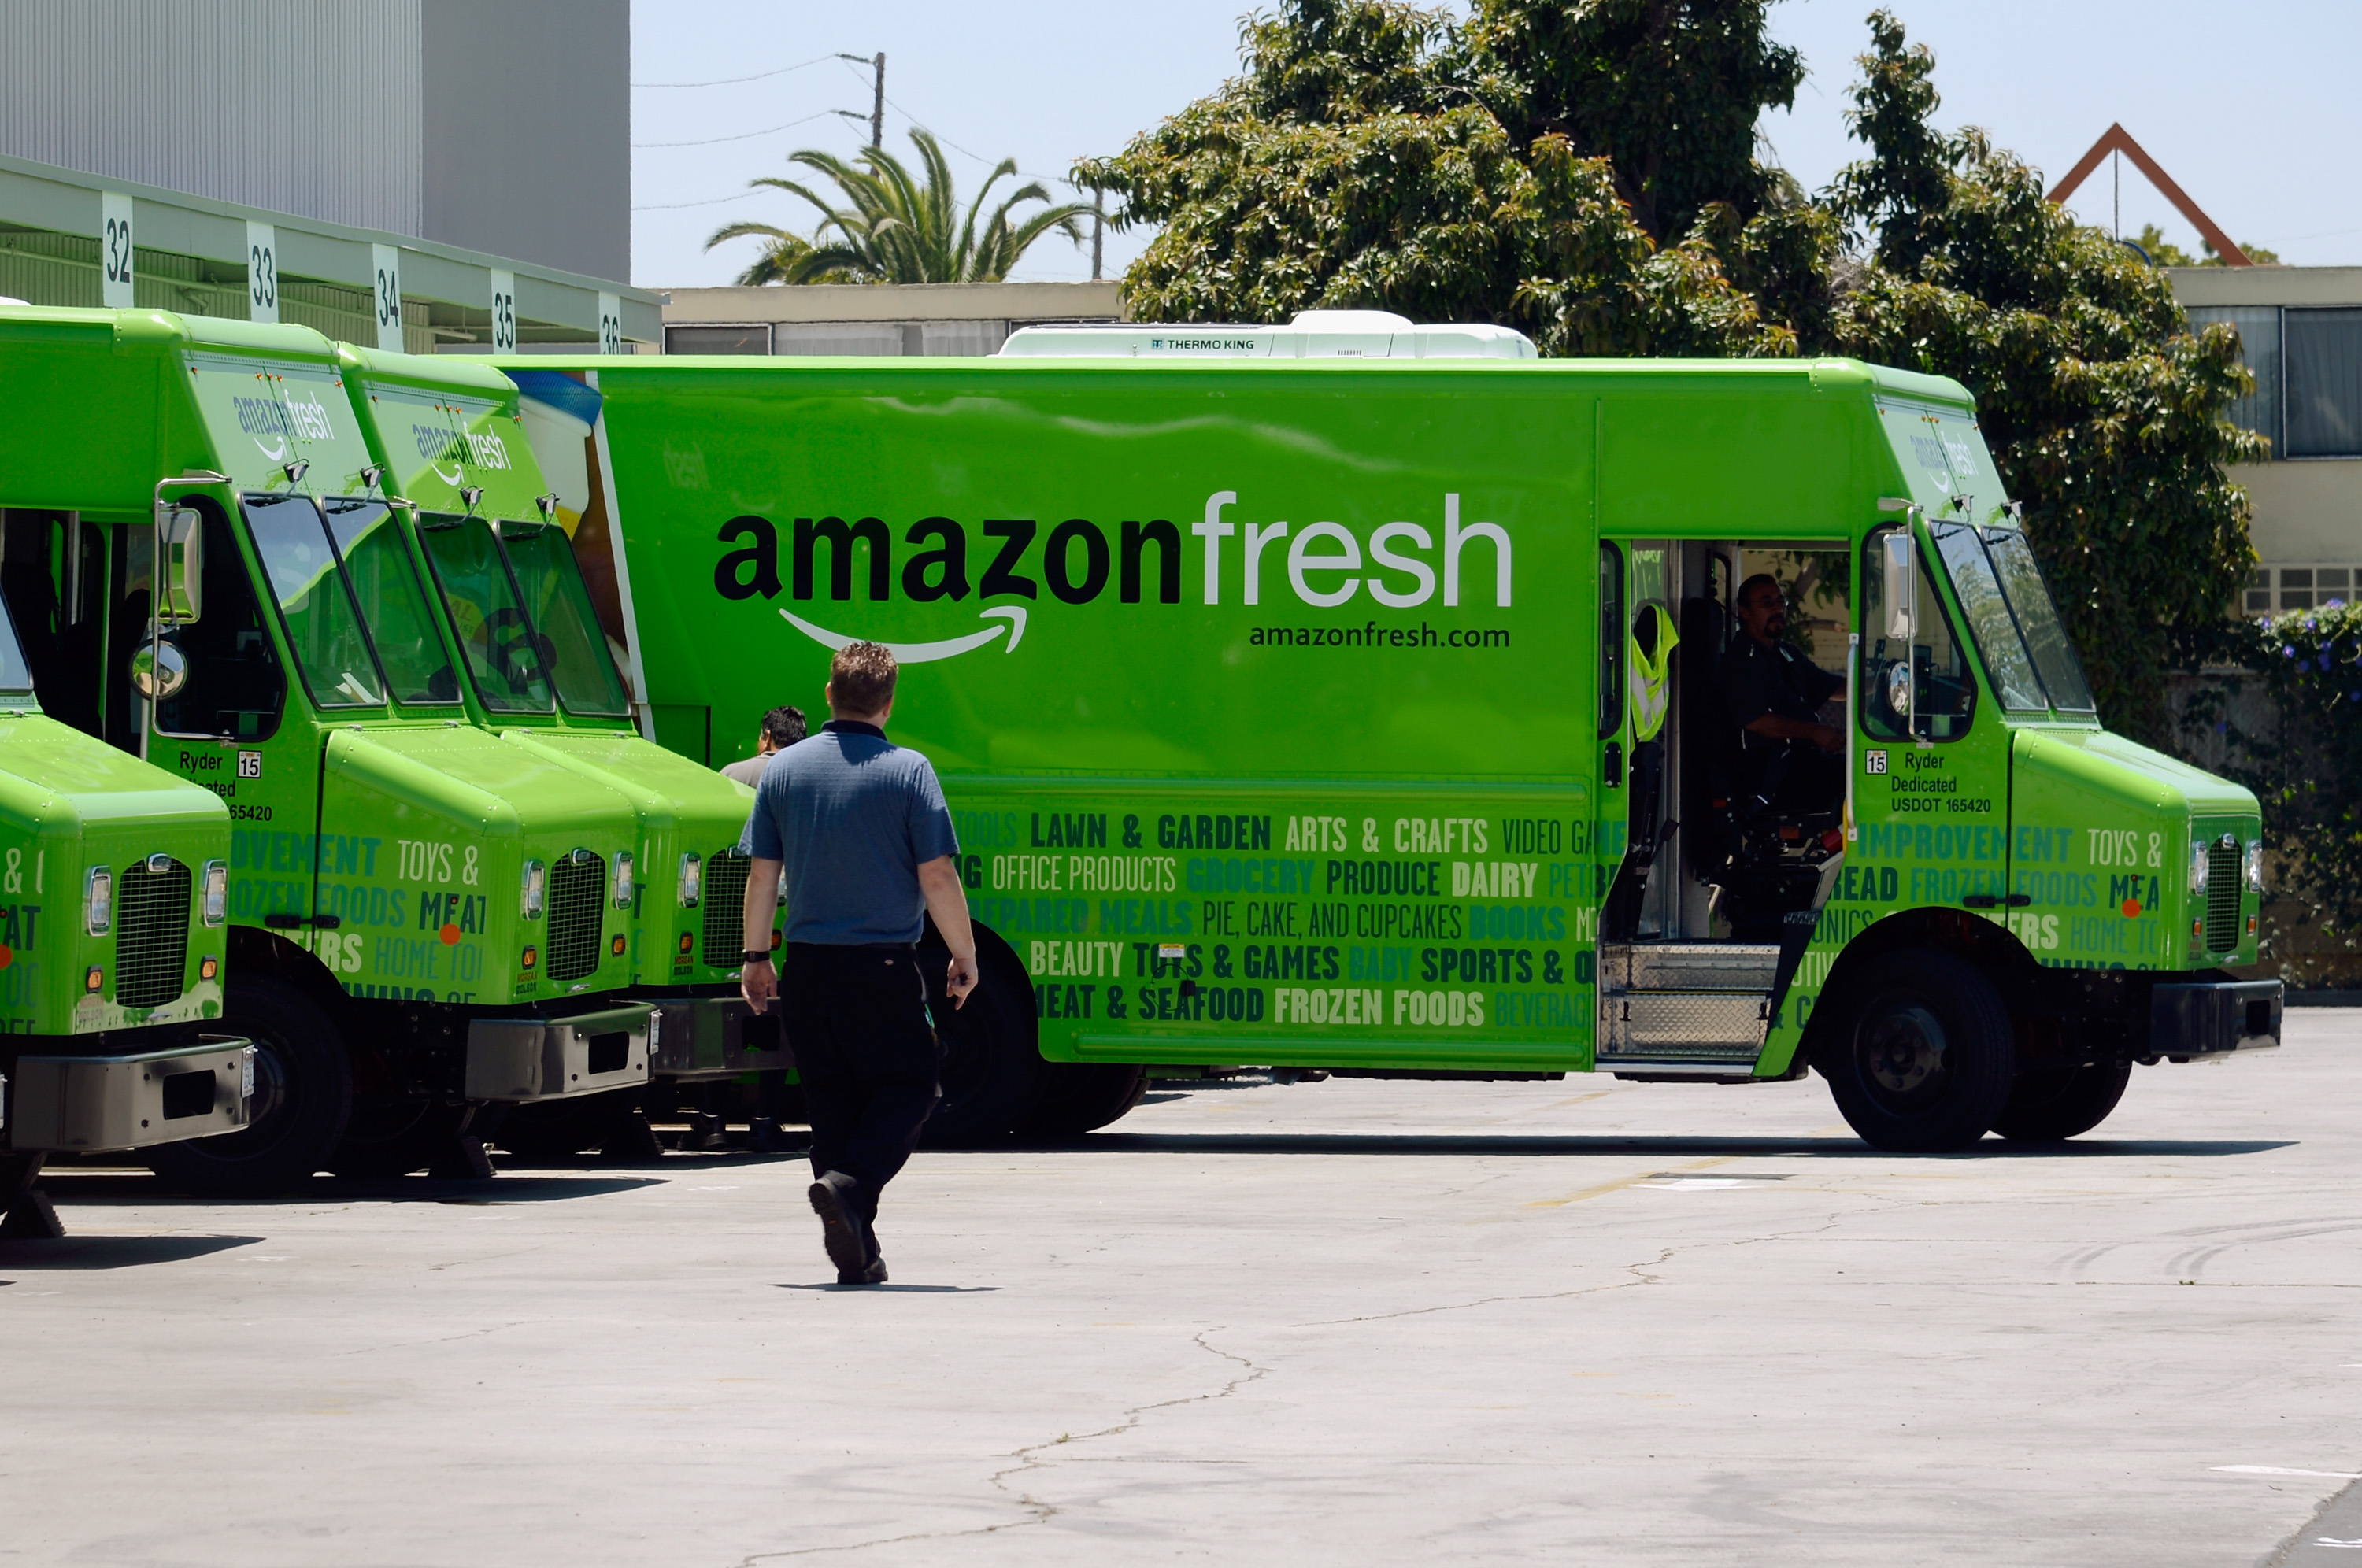 An Amazon Fresh truck arrives at a warehouse on June 27, 2013 in Inglewood, California. (Kevork Djansezian&mdash;Getty Images)